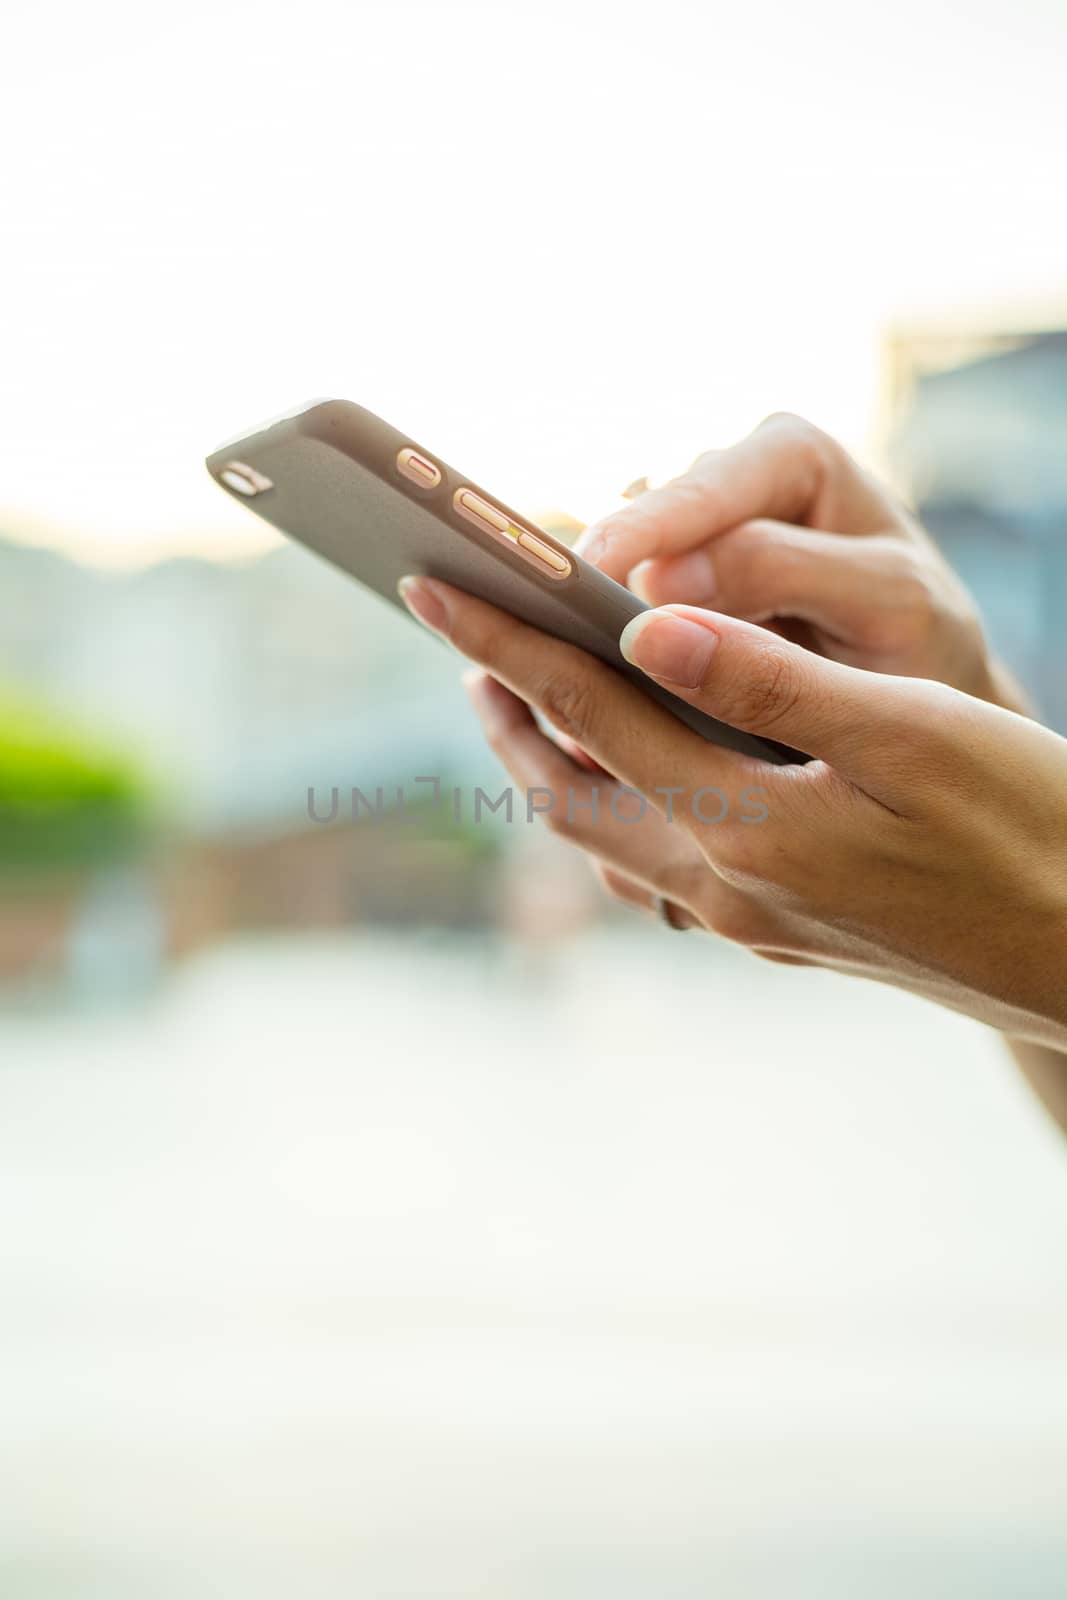 Woman sending sms on mobile phone